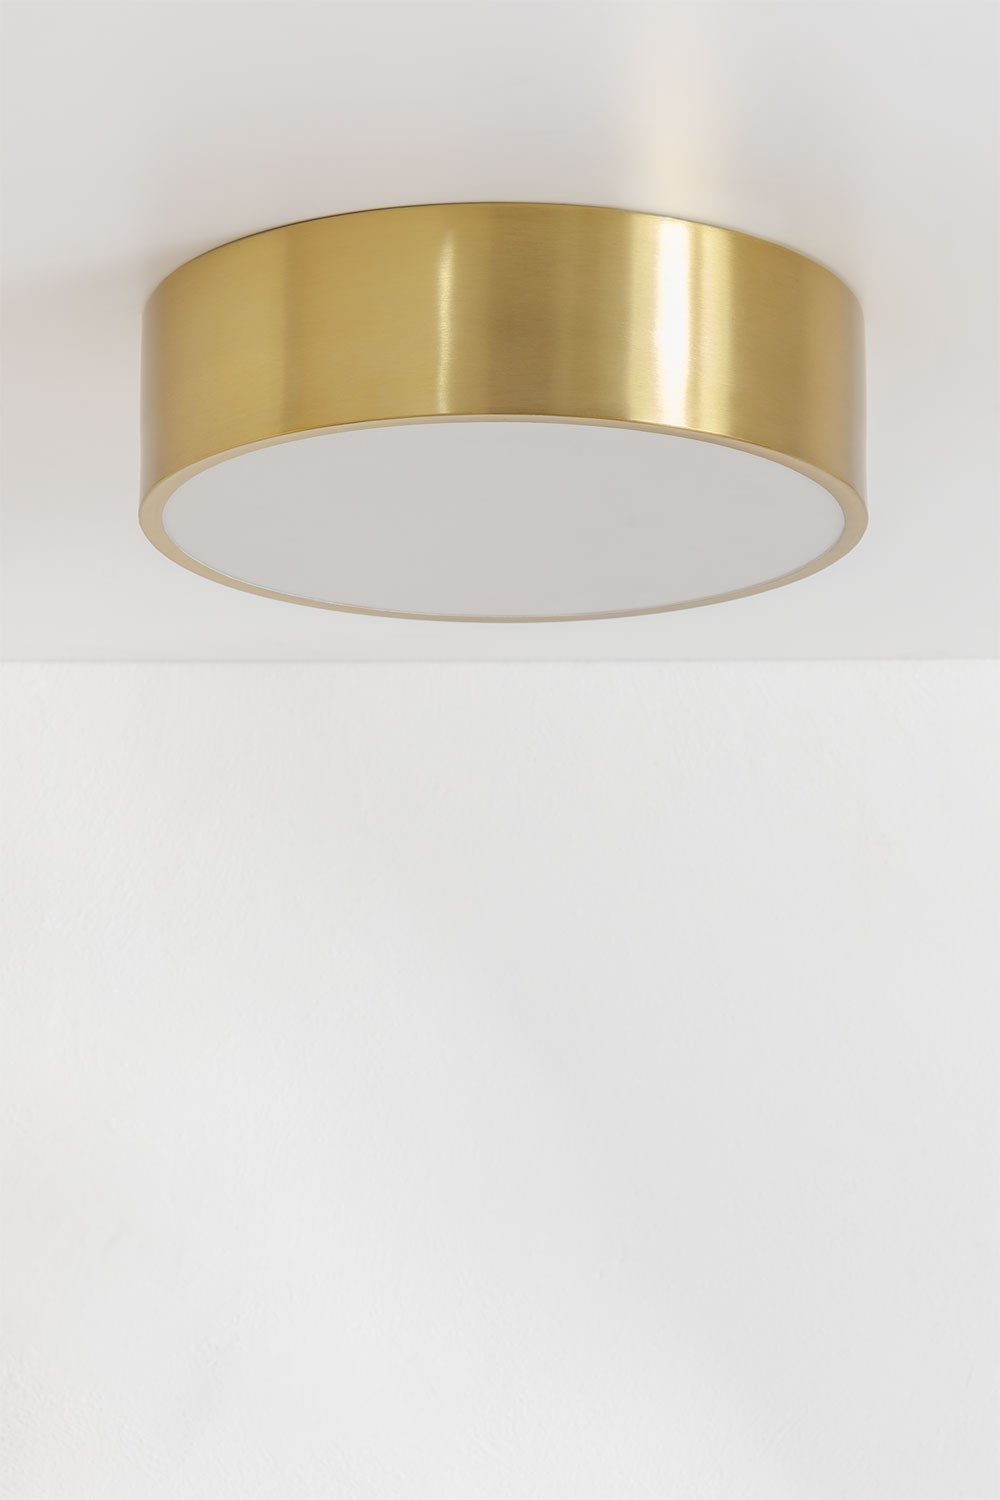 Metal ceiling lamp Volto, gallery image 1